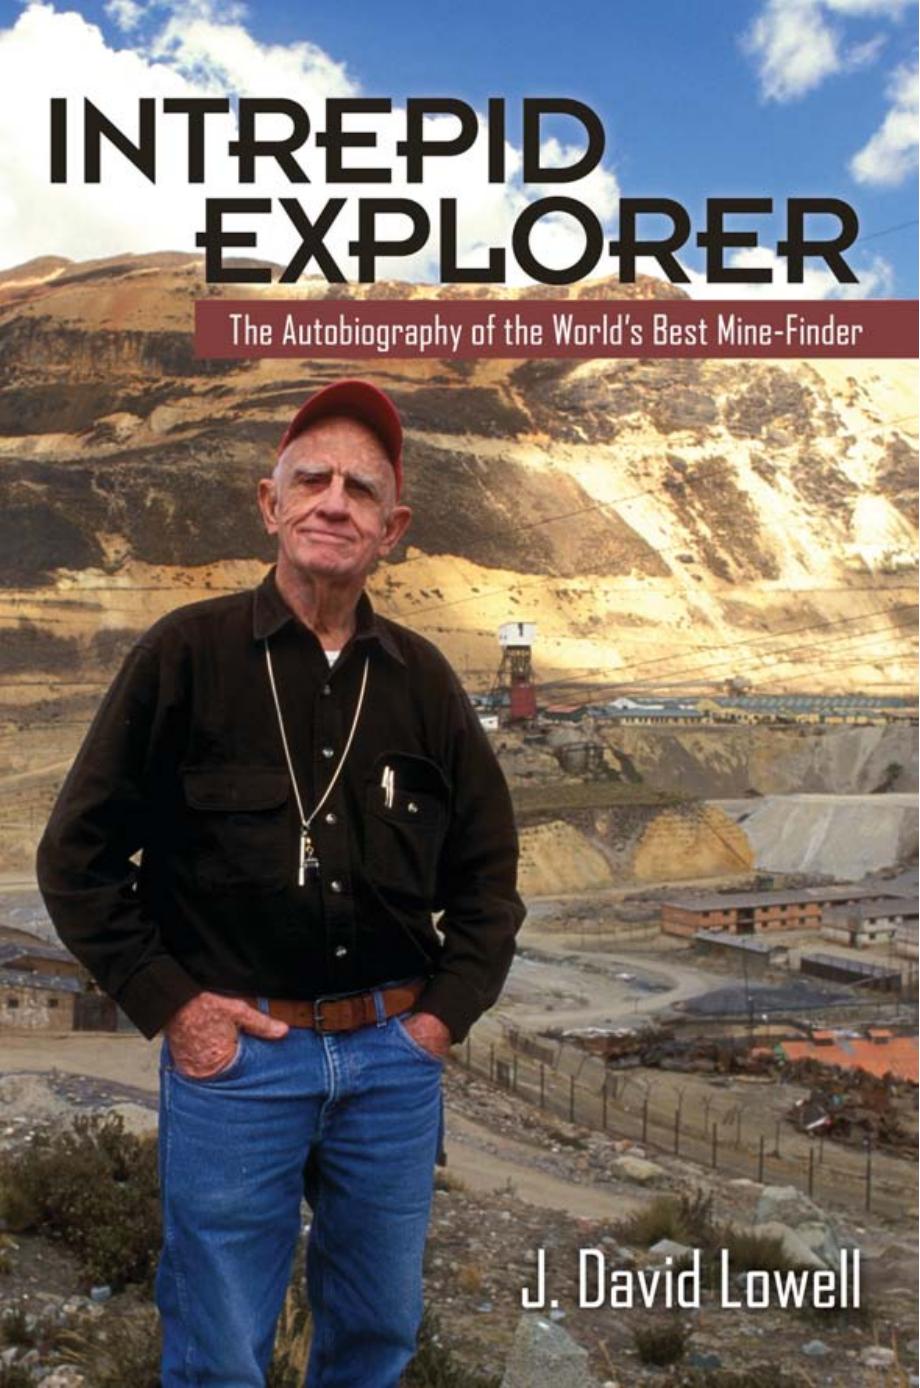 Intrepid Explorer : The Autobiography of the World's Best Mine Finder by J. David Lowell